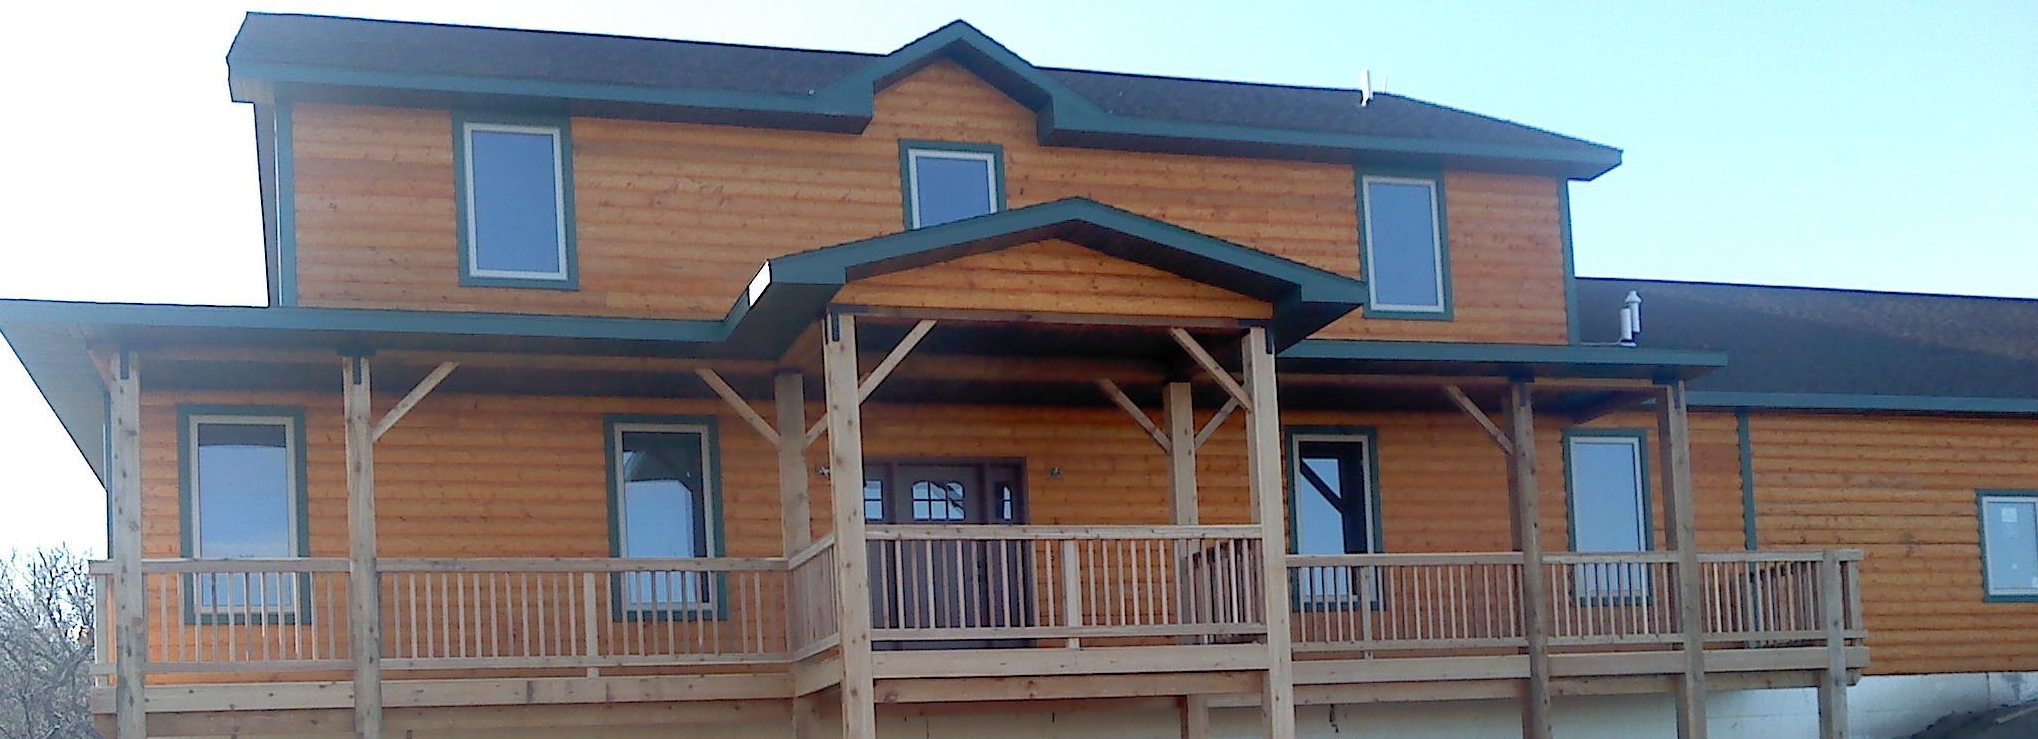 Deck and Roof.jpg